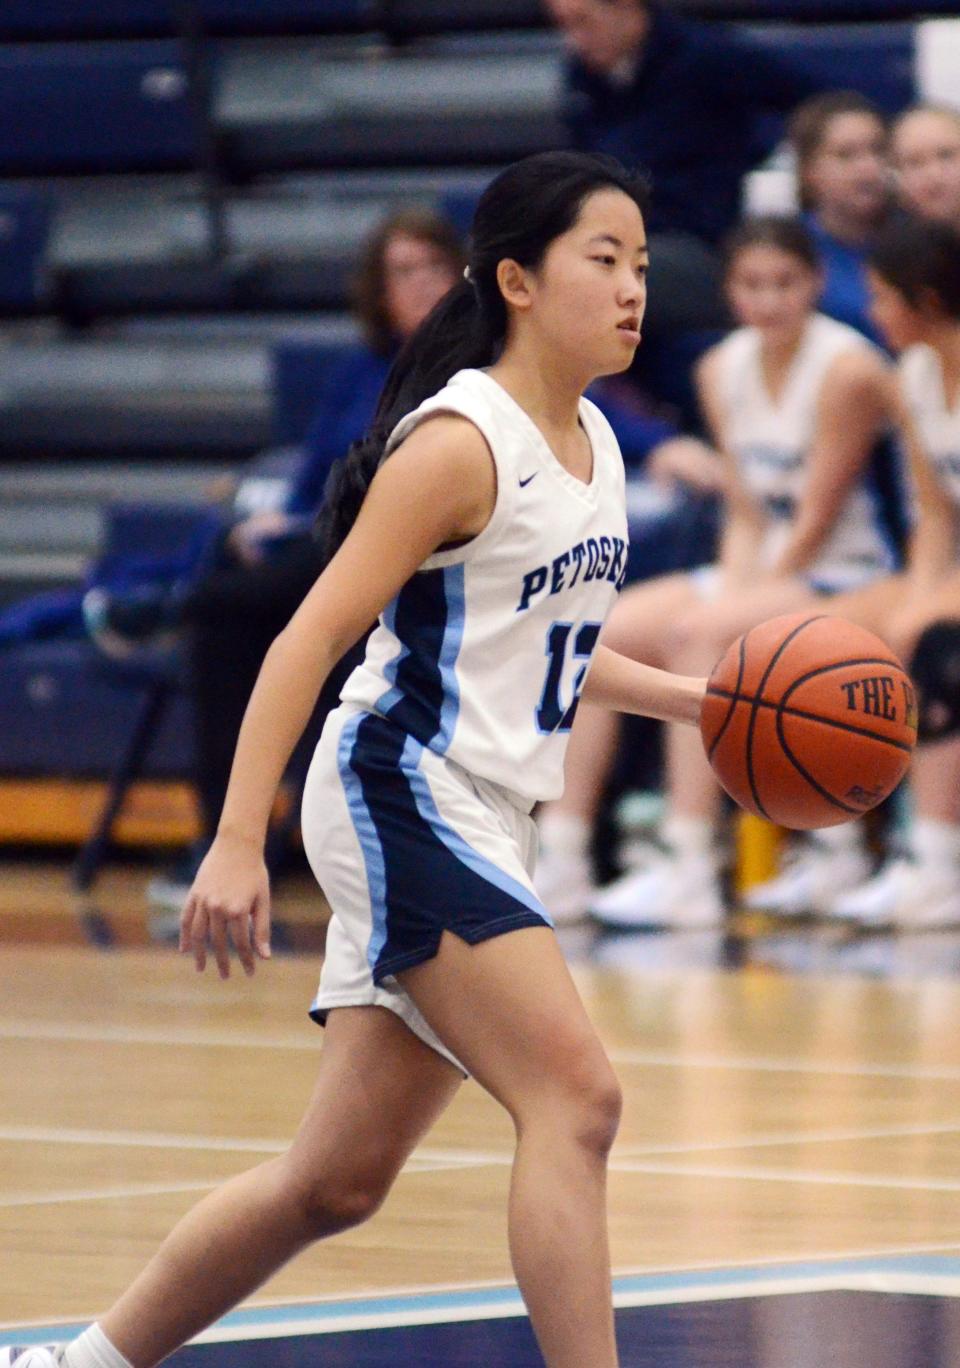 Petoskey guard Sophia Lee brings the ball up the court in the first half Tuesday.